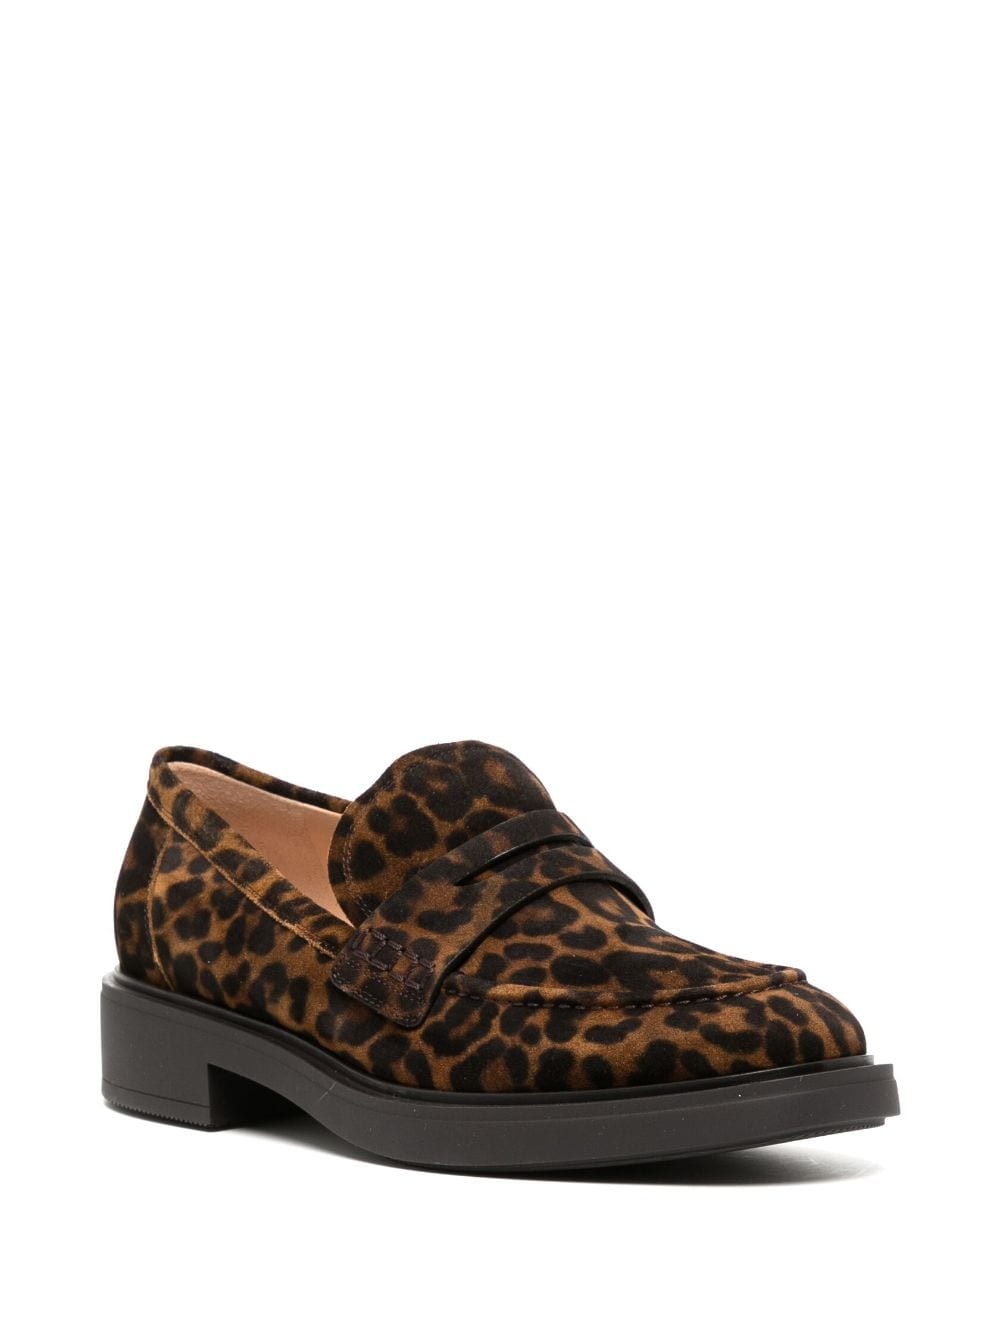 leopard-print leather loafers - 2